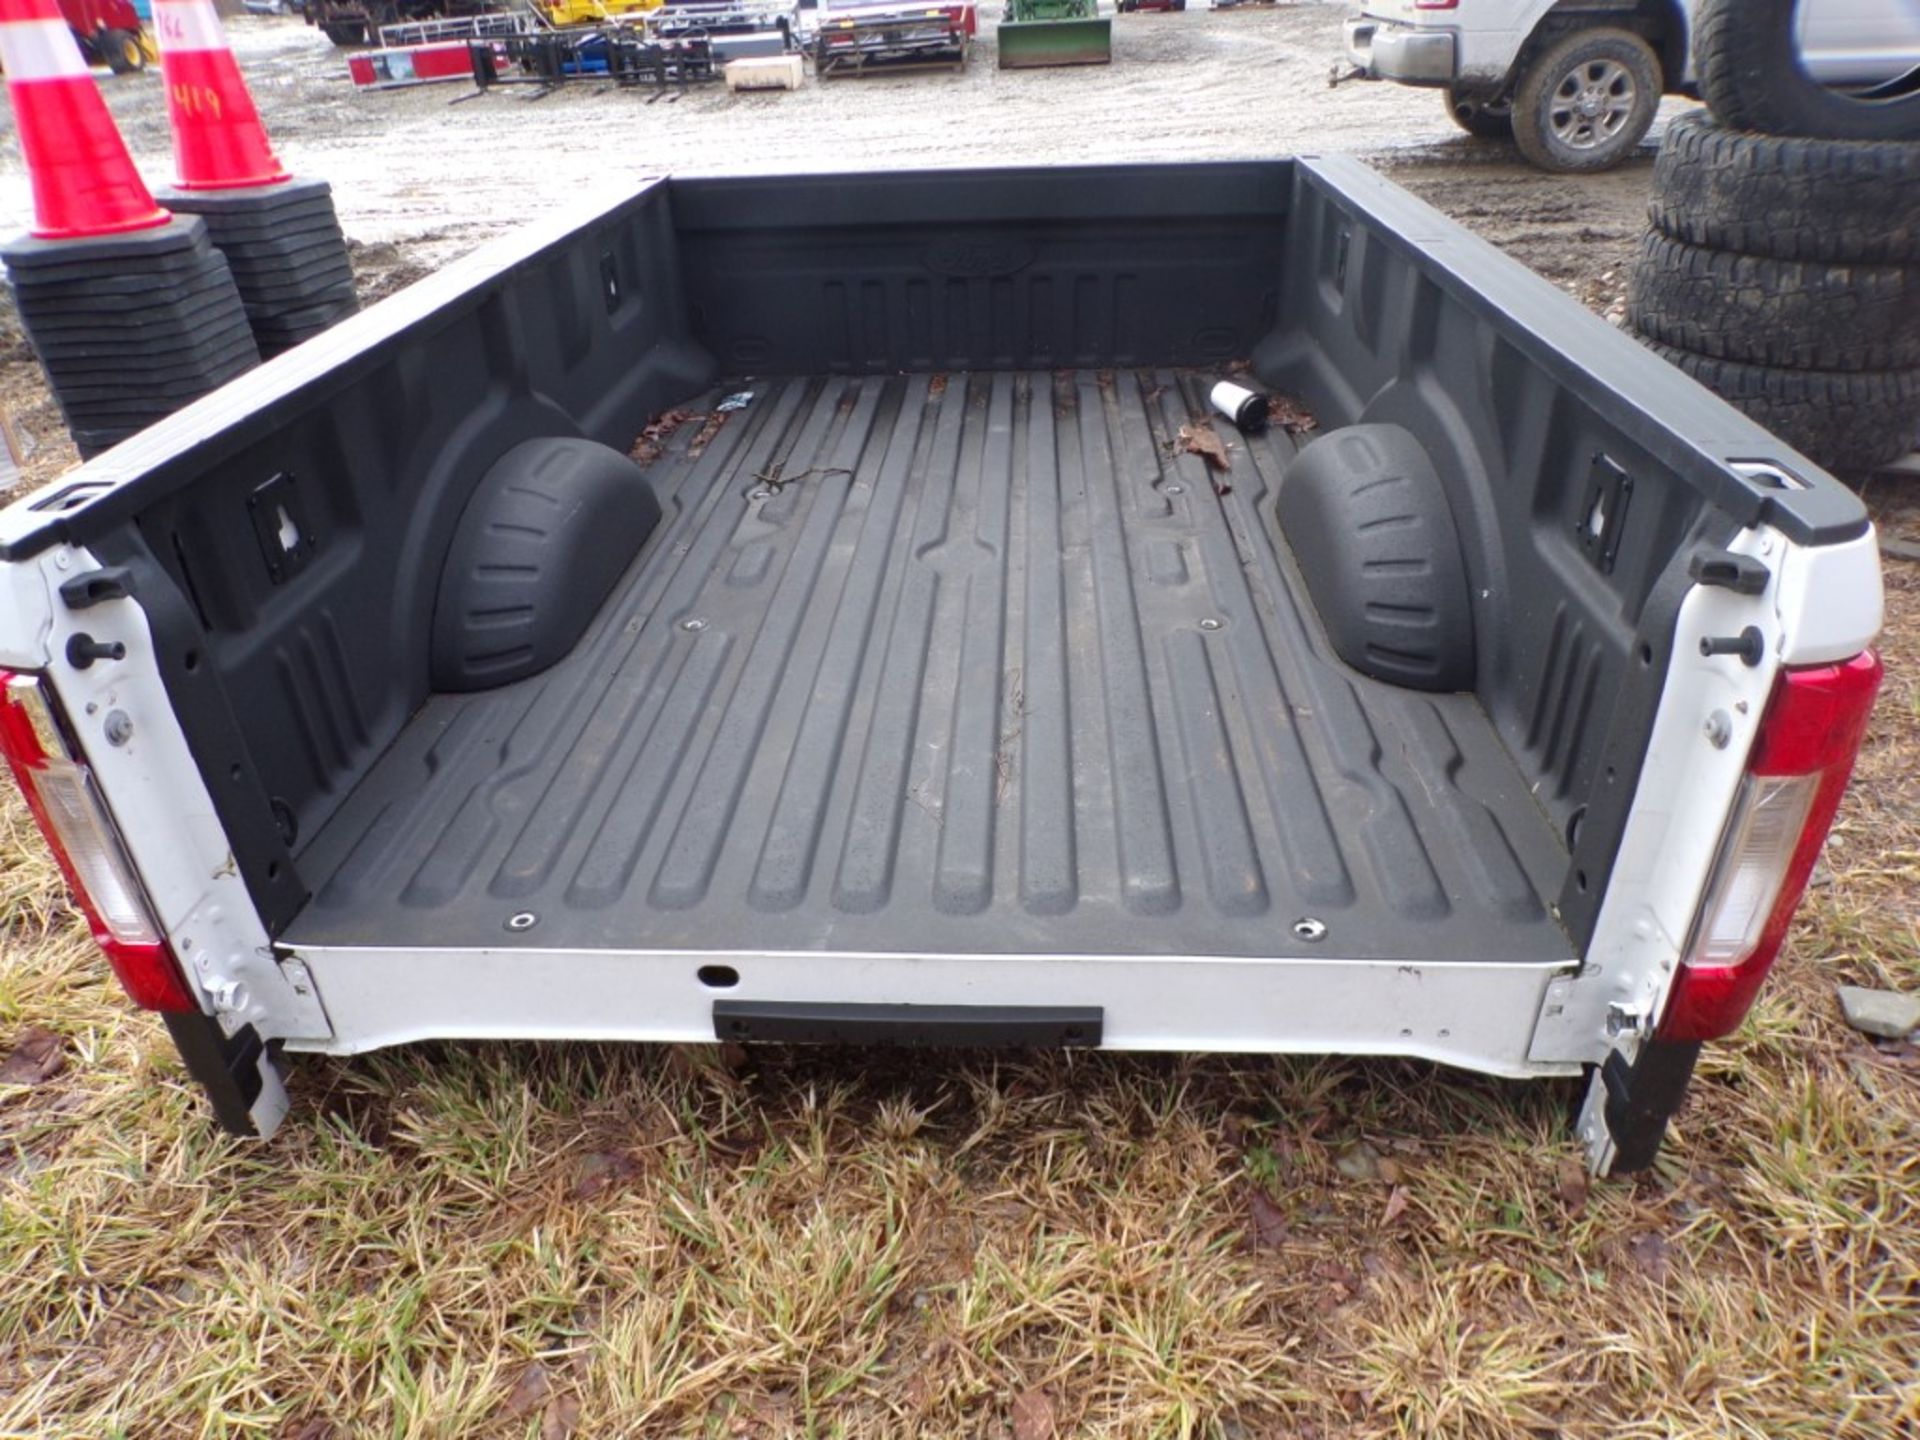 8' Ford Super Duty Truck Box, White, w/Spray-In Liner, No Tailgate And Damage To Passenger Wheel - Image 3 of 3